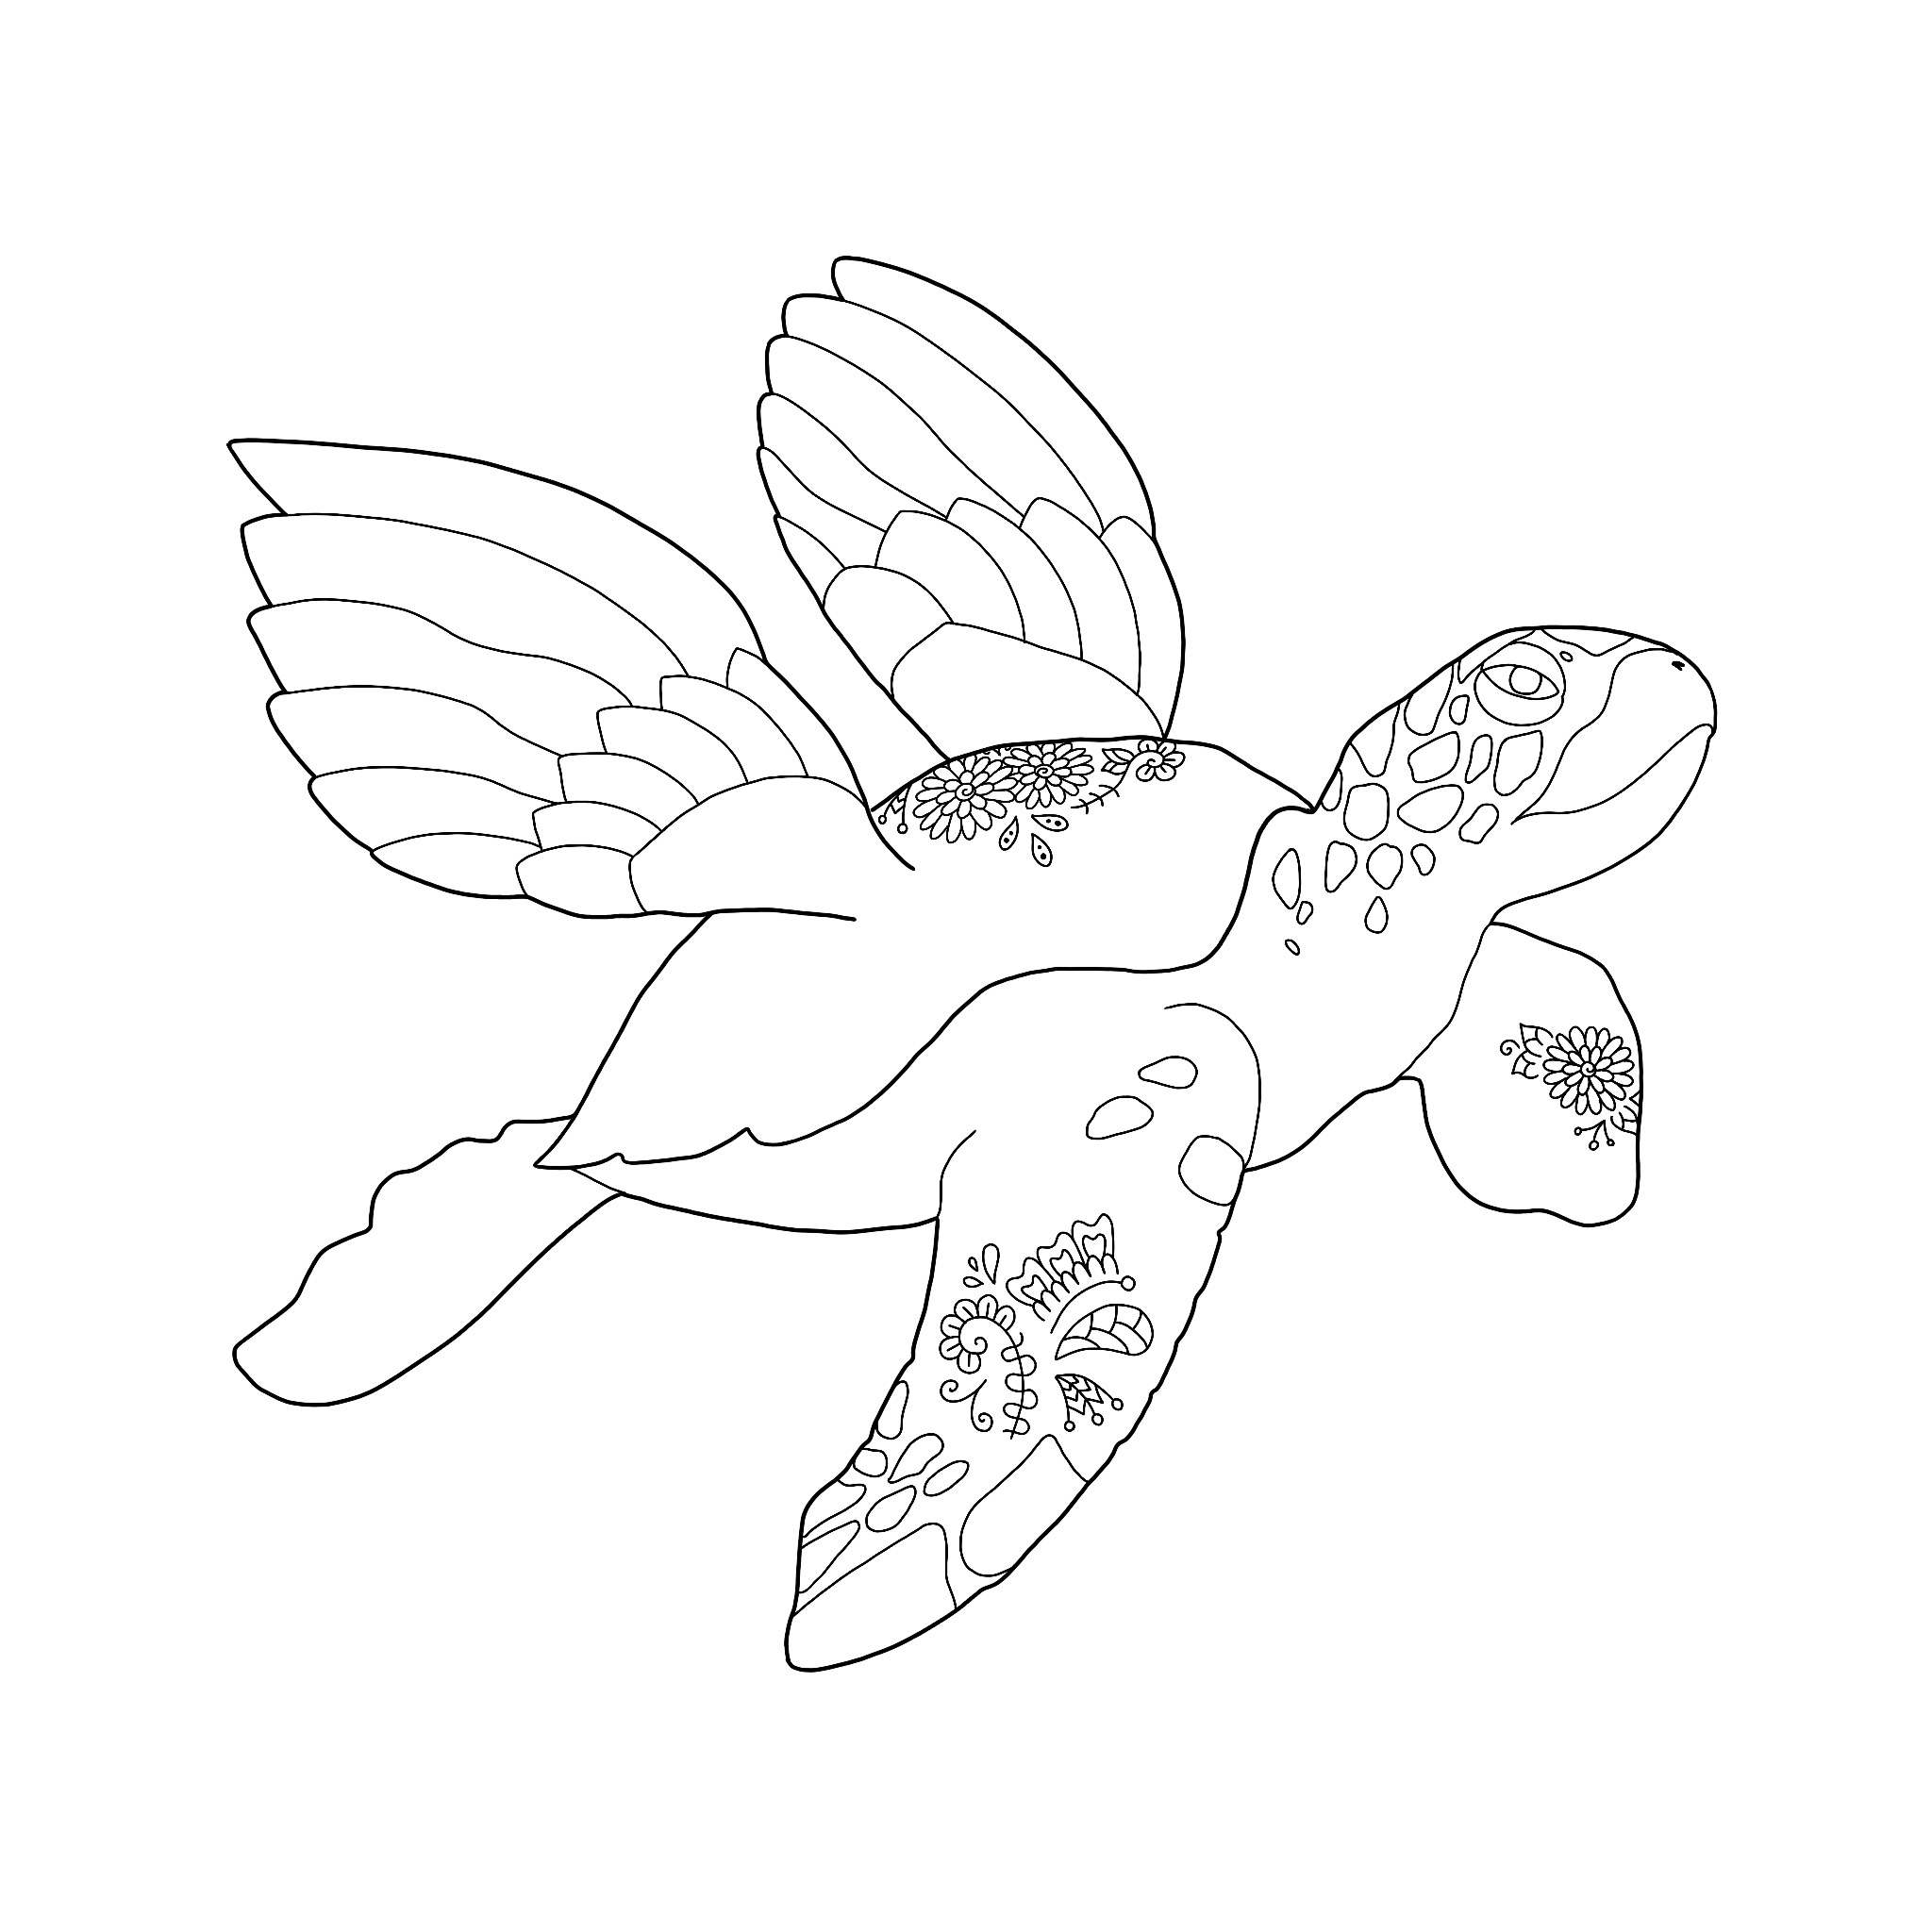 Winged turtle coloring sheet with black linework and white background. Shows sea turtle floating in the air with wings.